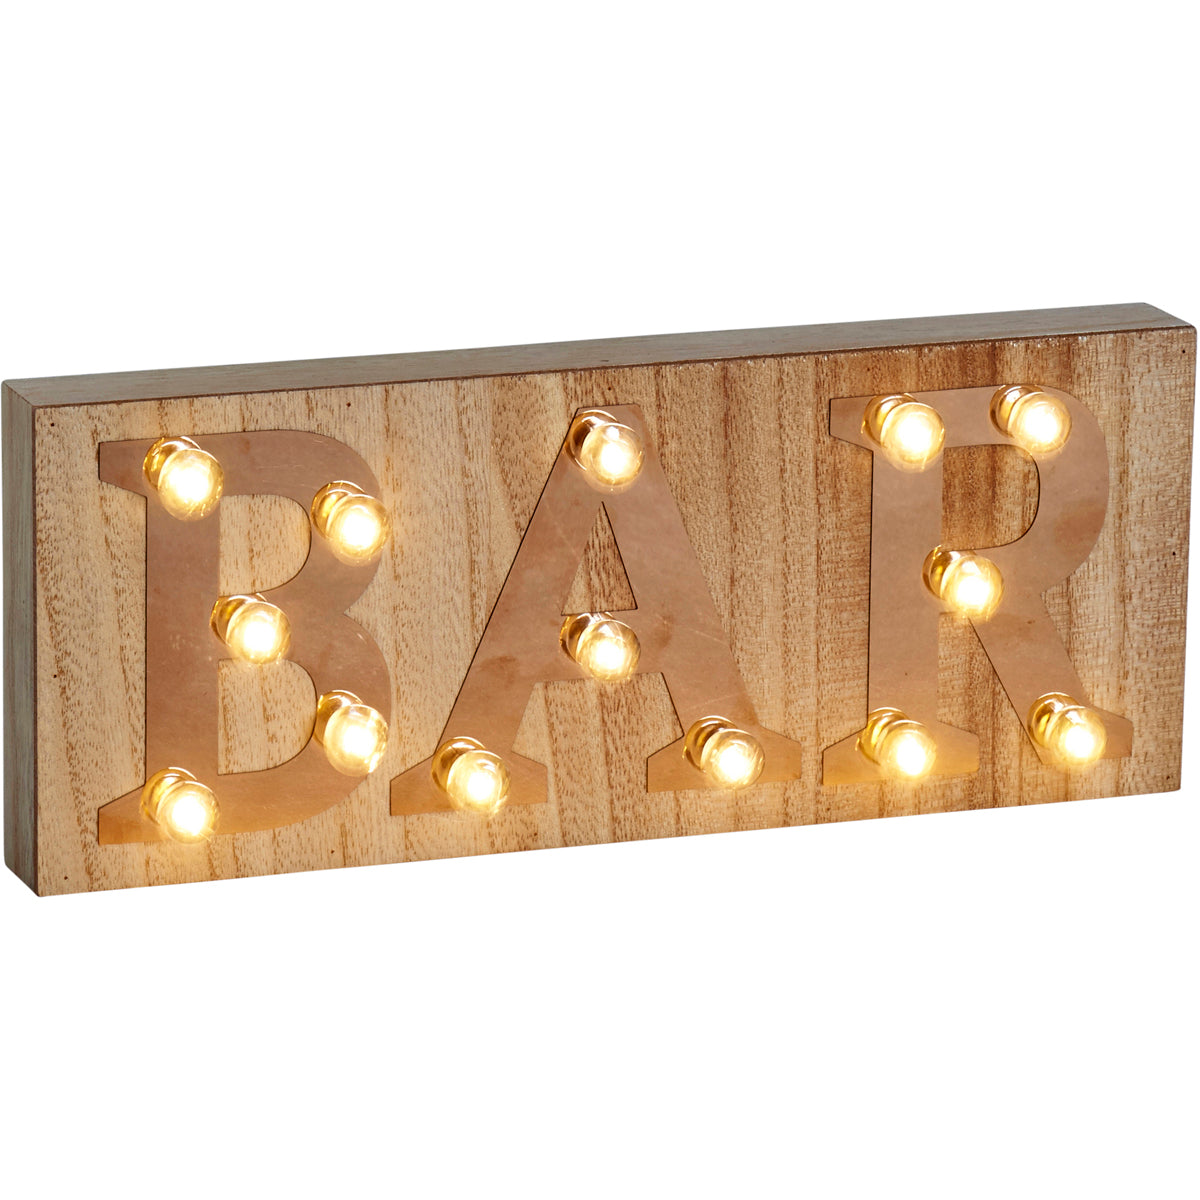 Copper and Wood 'BAR' Light Up Sign